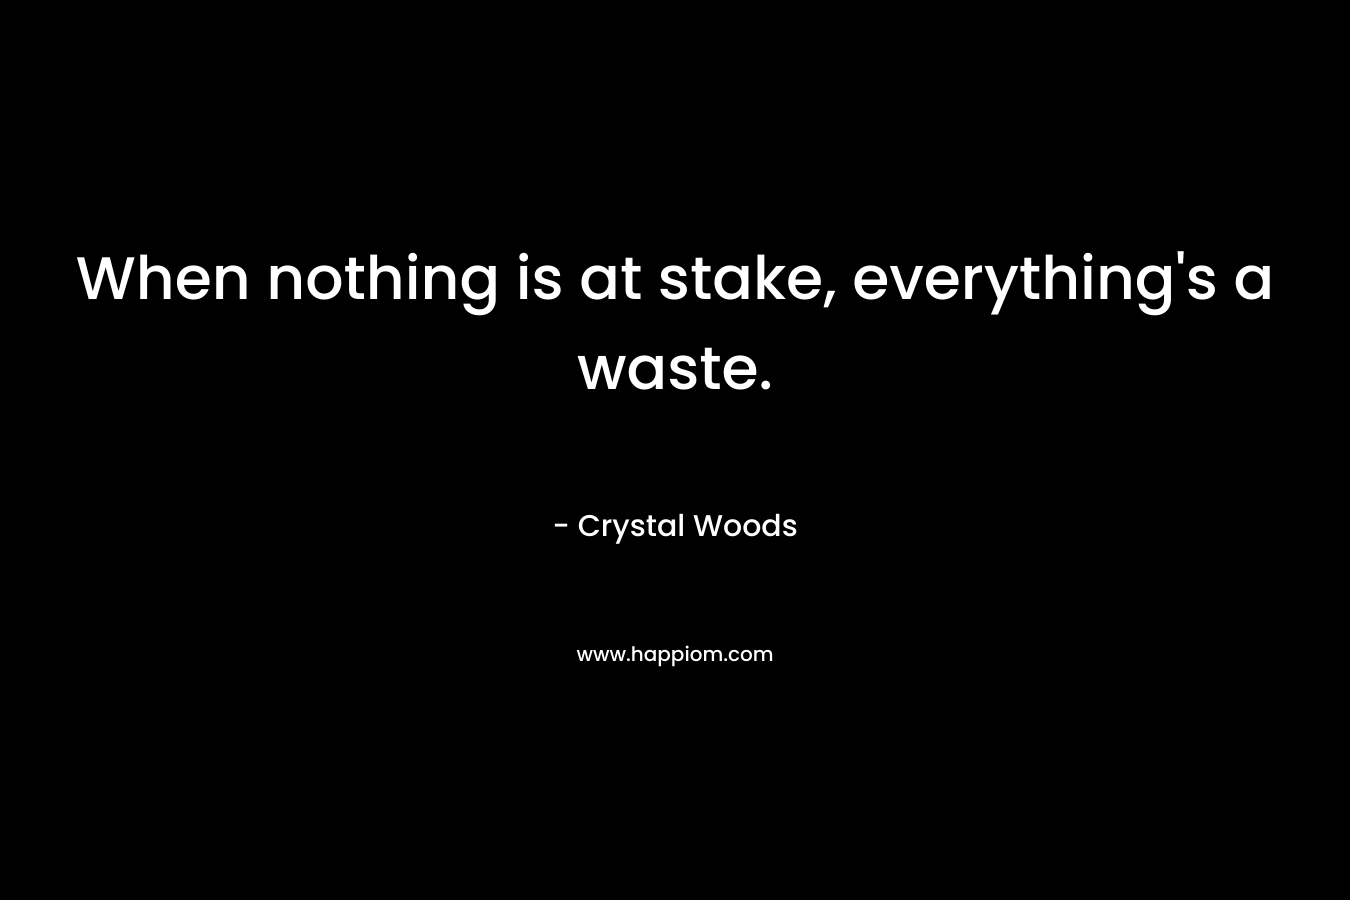 When nothing is at stake, everything’s a waste. – Crystal Woods